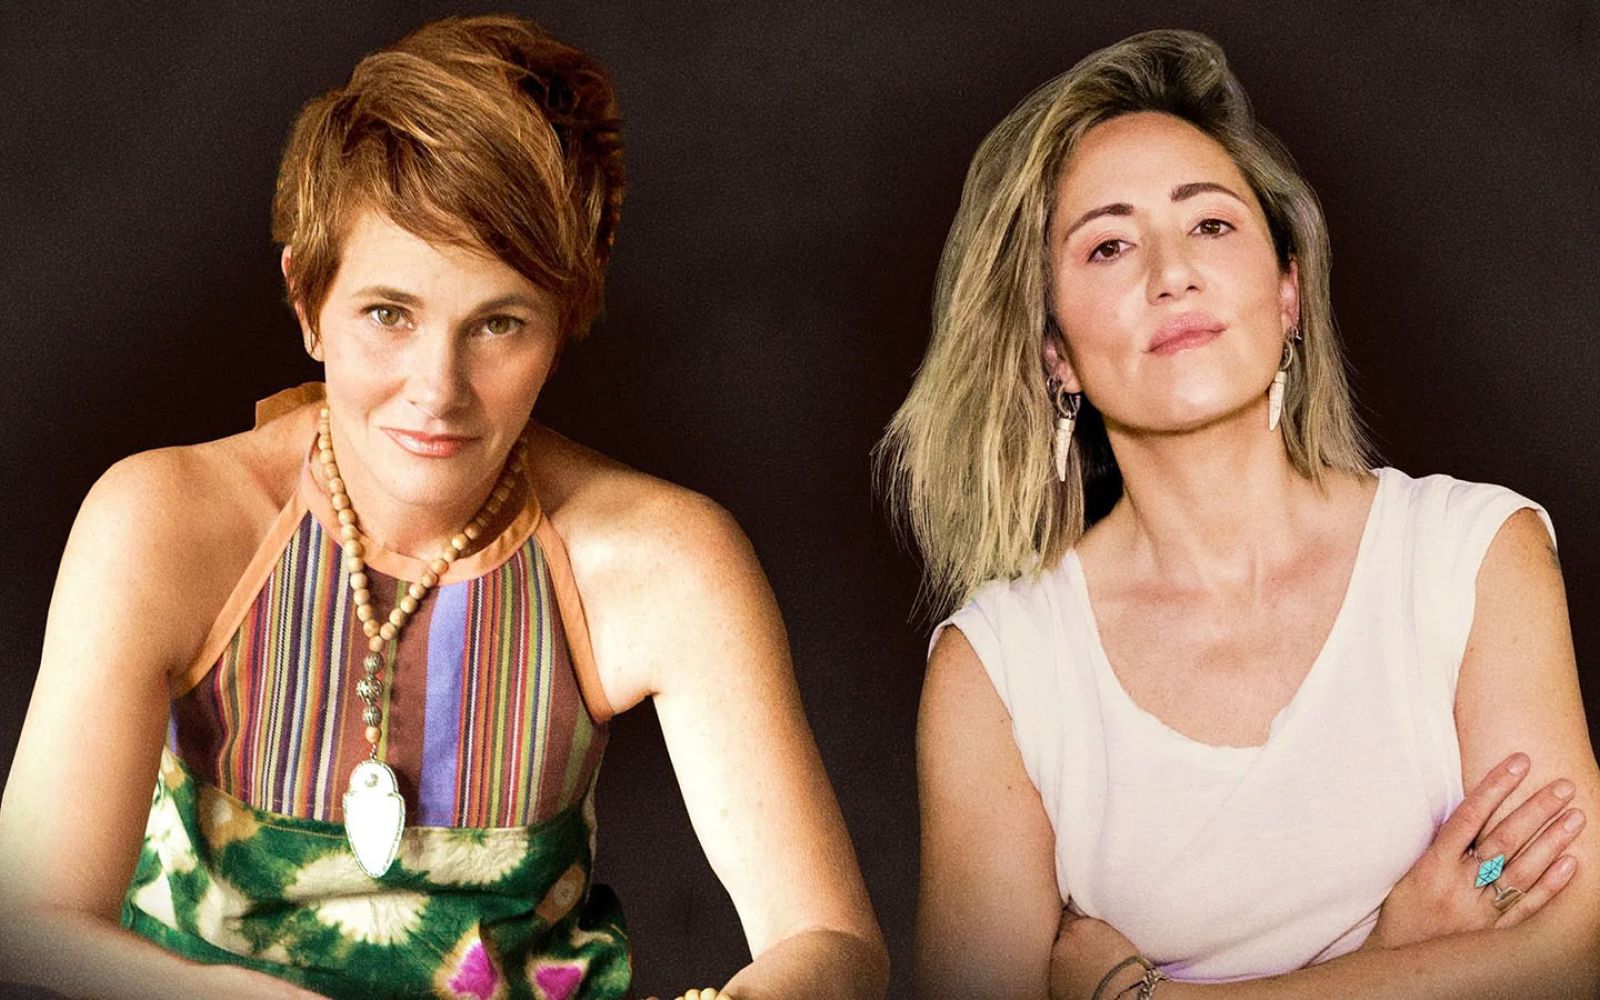 Spend an evening with Shawn Colvin and KT Tunstall on Thursday, May 2, at The Clyde Theatre.